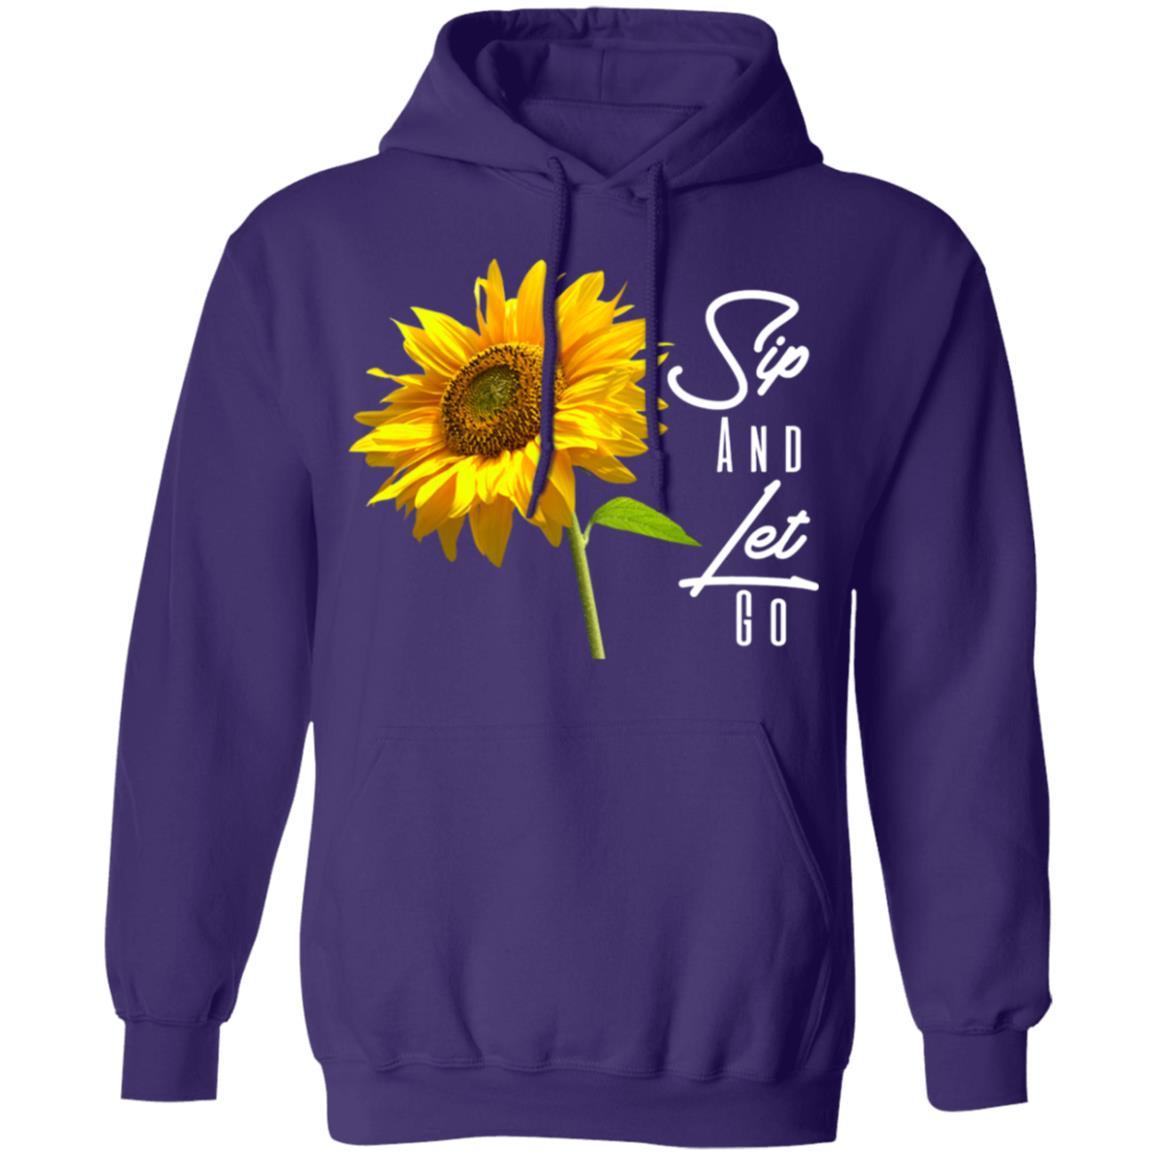 Sip And Let Go Pullover Hoodie - Purple - Loyalty Vibes